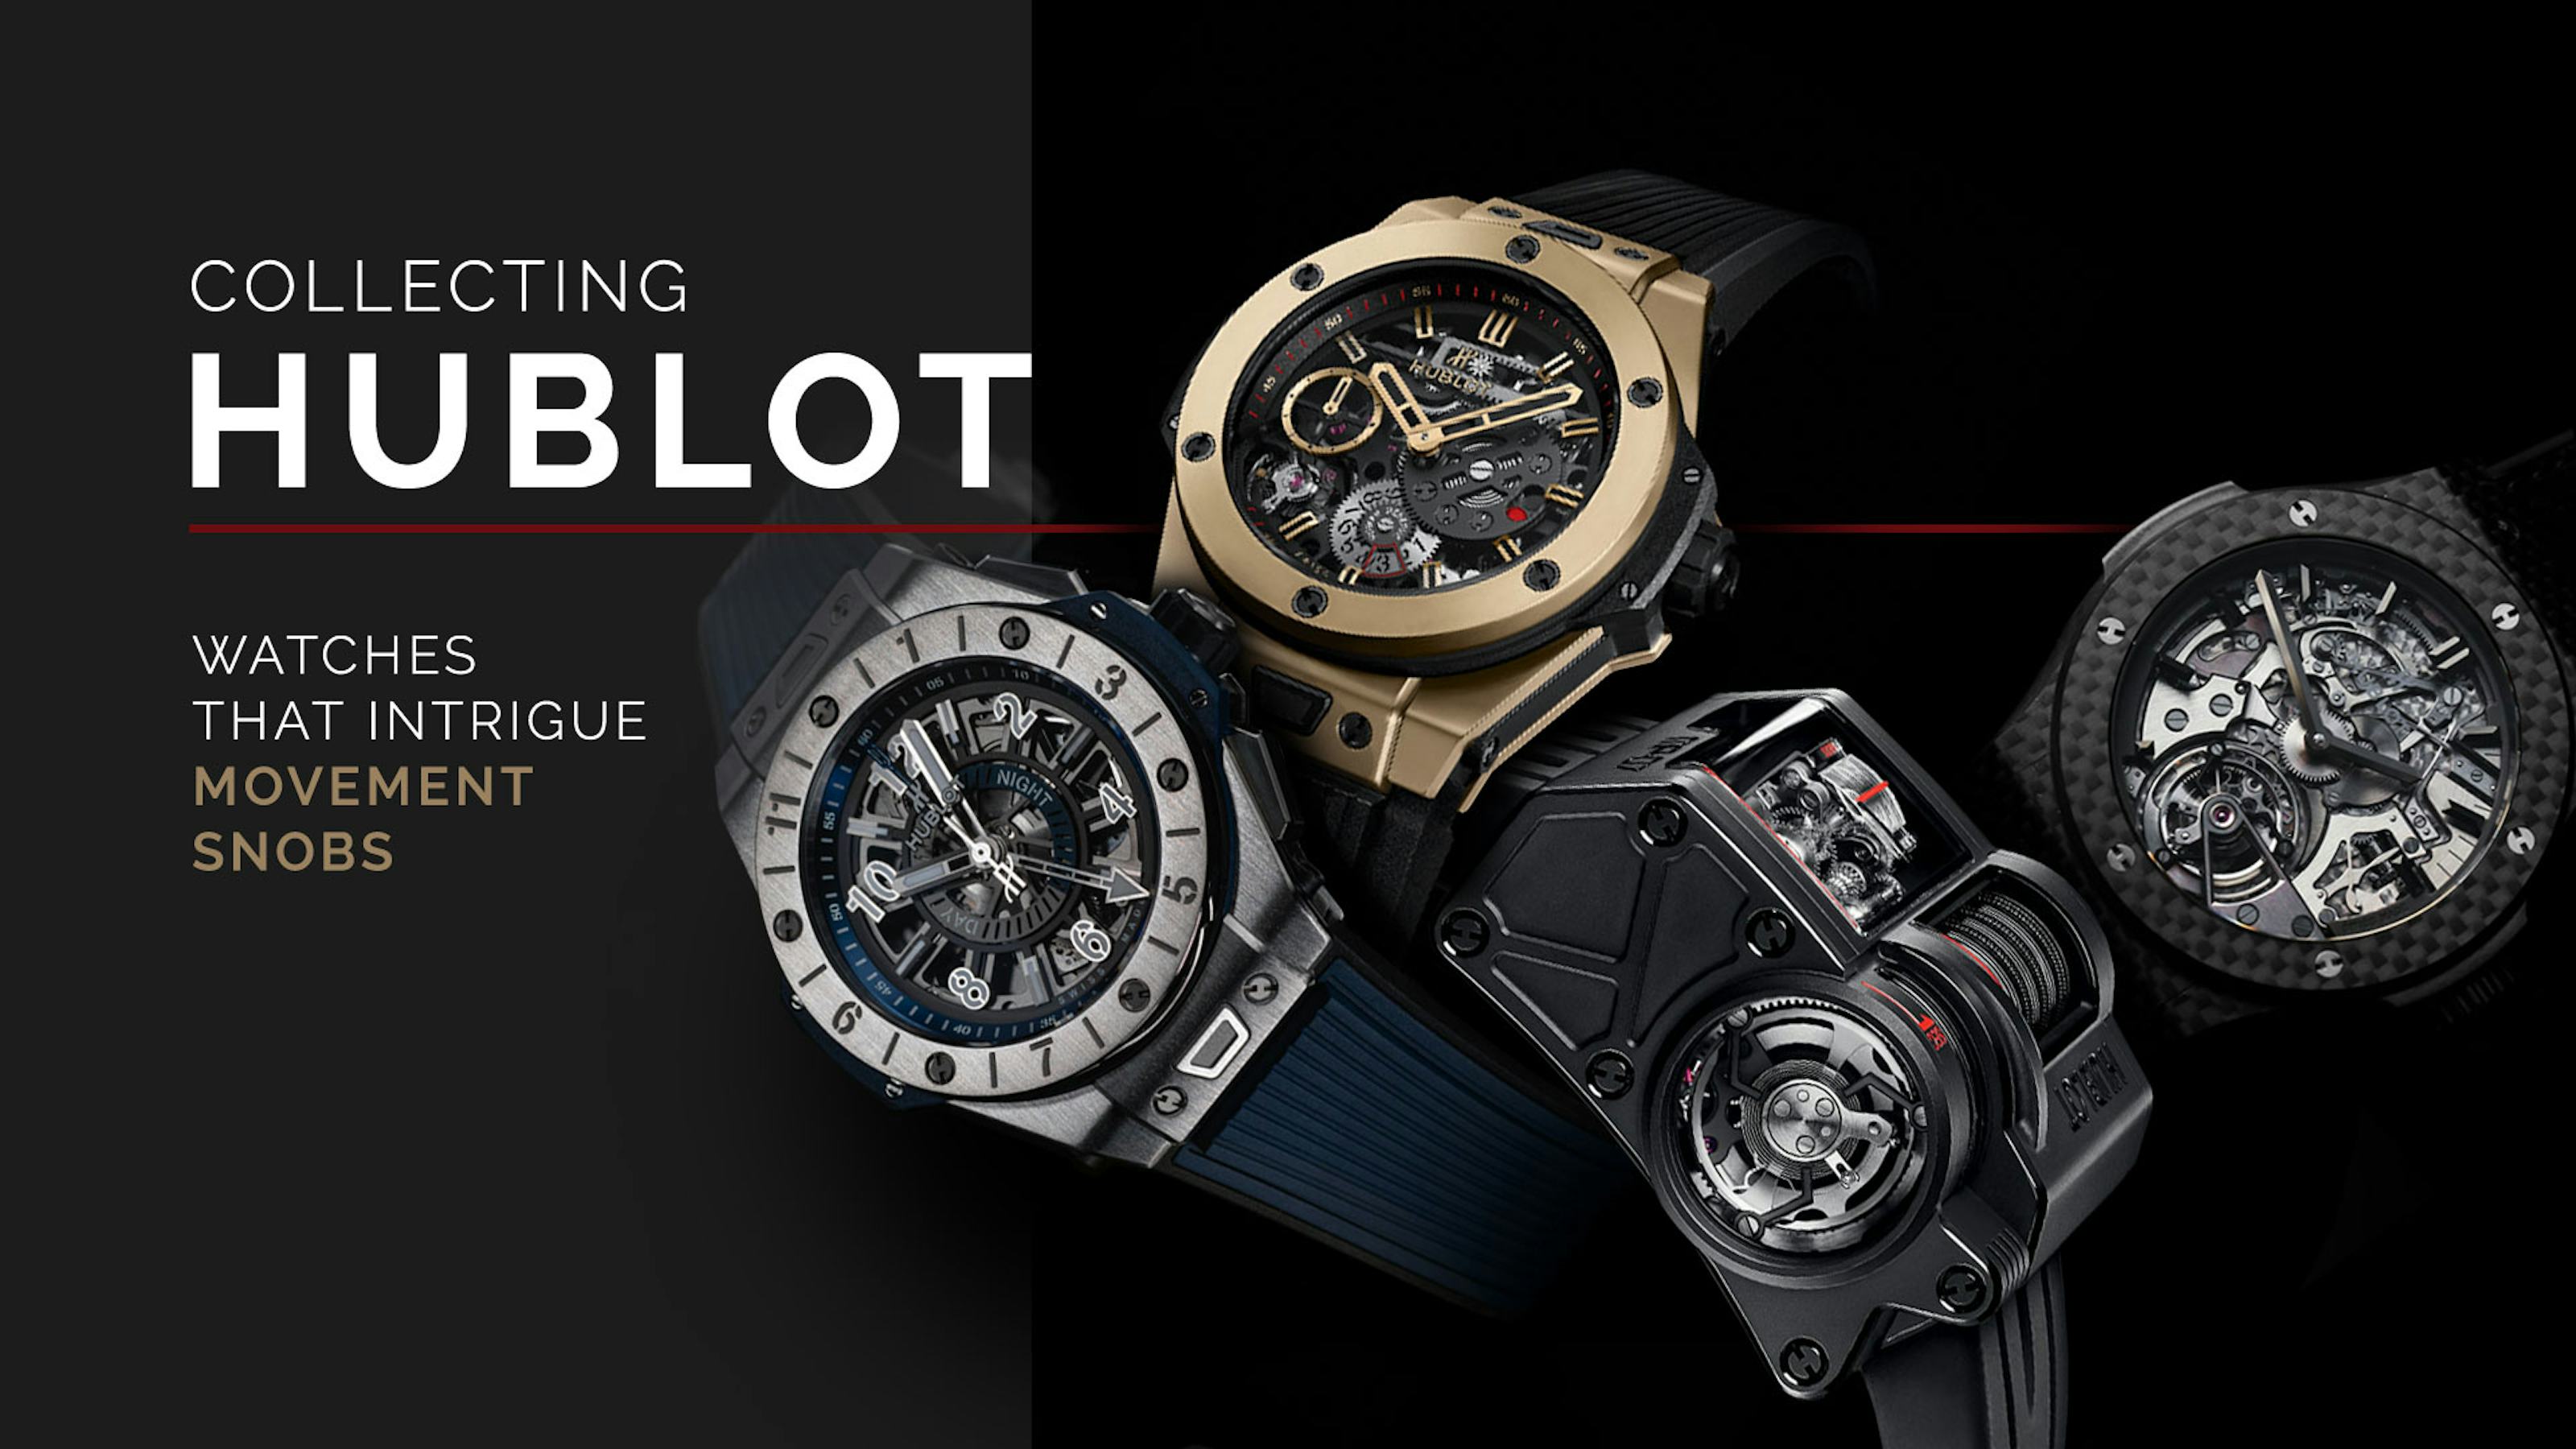 Hublot Collecting for Movement Snobs